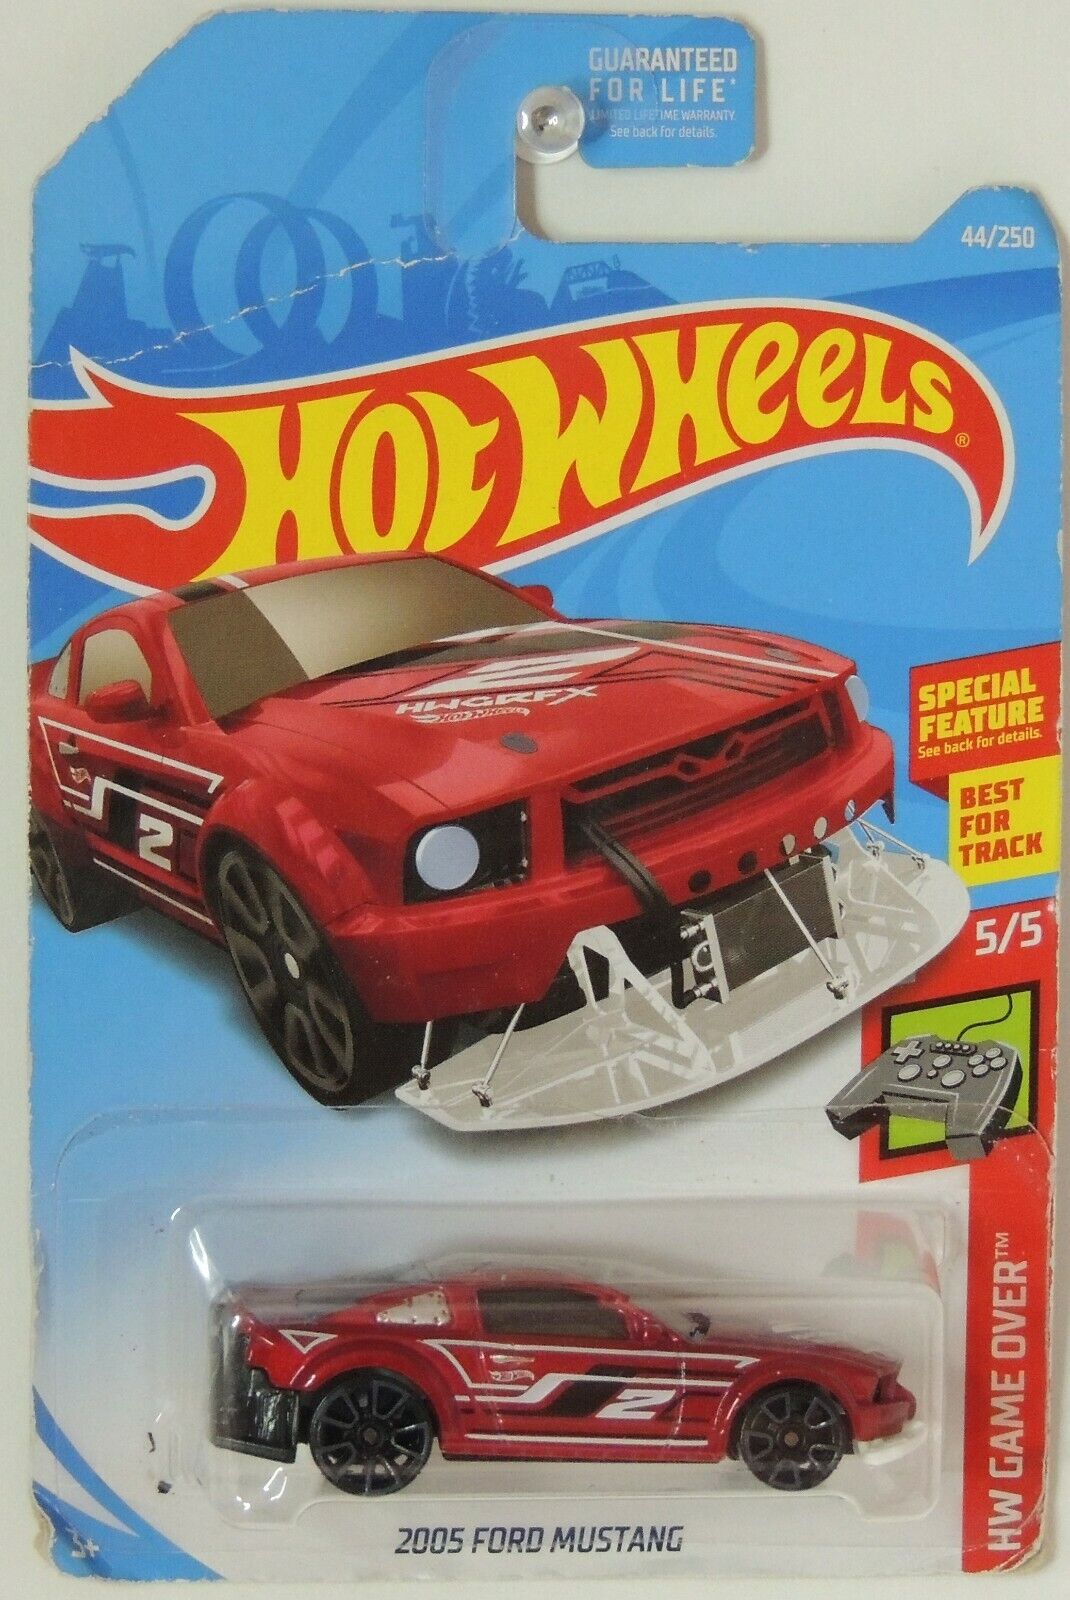 2019 Hot Wheels #44/250 Special Feature HW Game Over 5/5-2005 Ford Mustang